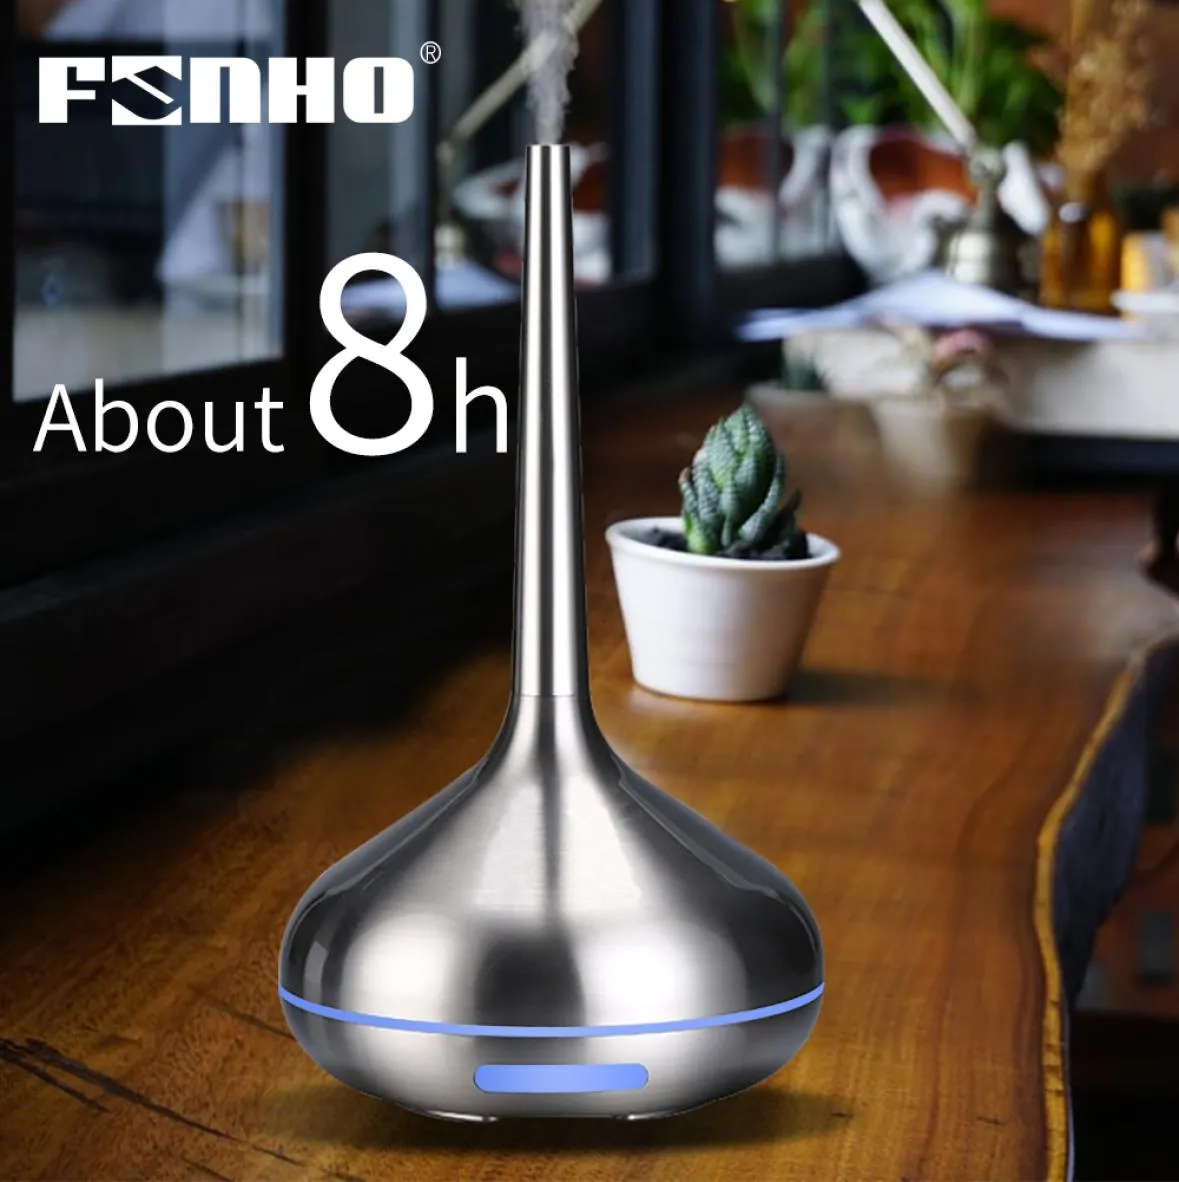 FUNHO Humidifier Ultrasonic Air Aroma Diffuser Purifier Aromatherapy Essential Oil Mist Maker with Night LED Light Lamp for Home Y3445355